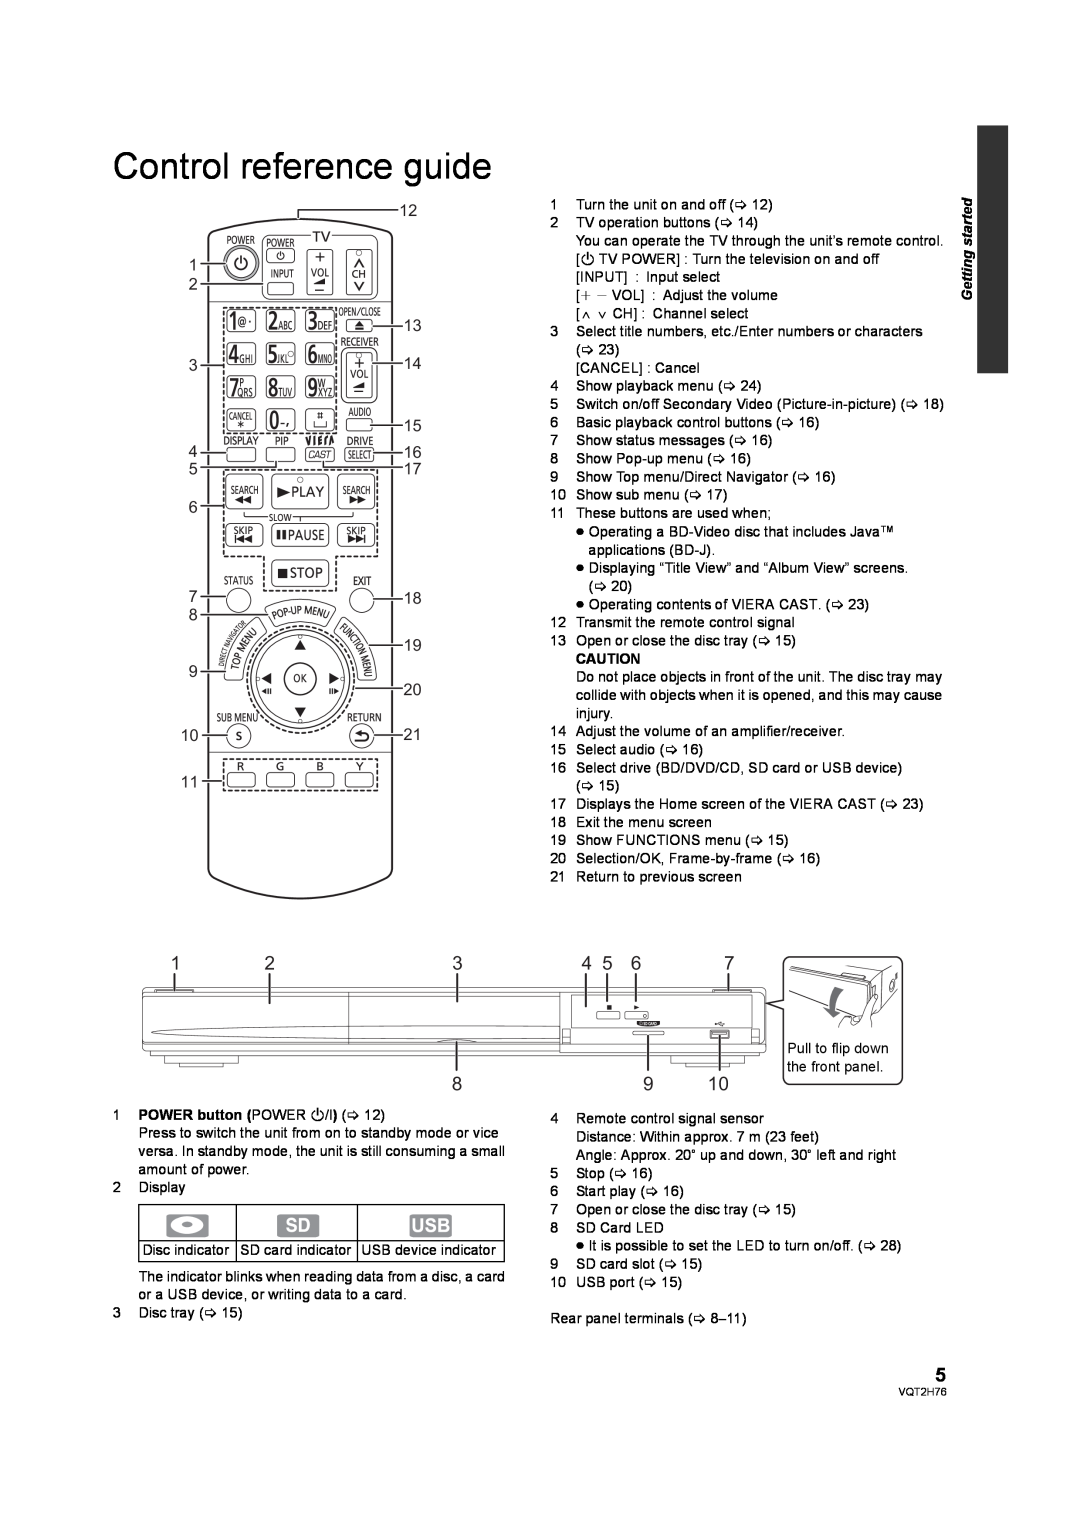 Panasonic DMP-BD85EGK operating instructions Control reference guide, POWER button POWER Í/I 